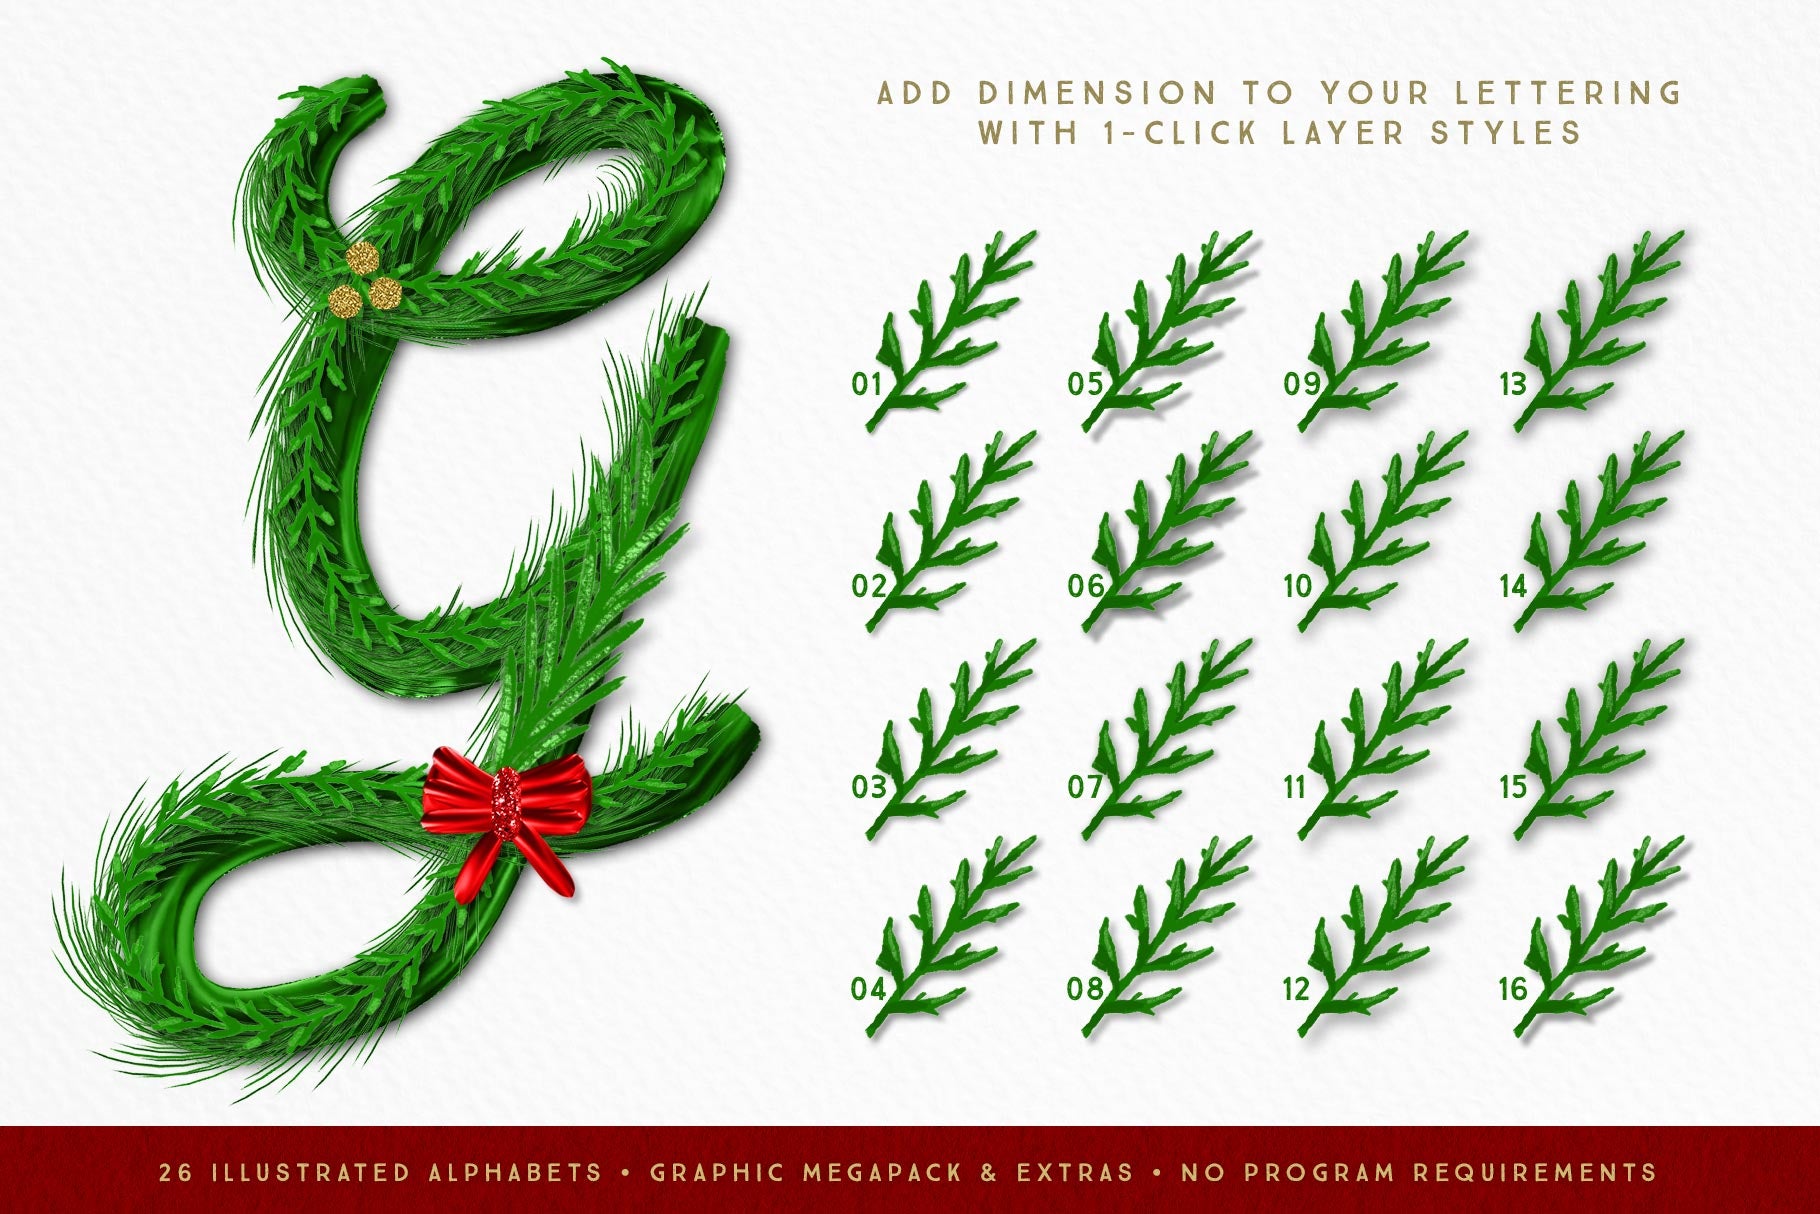 Luxe Christmas & Holiday Greenery Alphabets: layering lettering drop shadow styles